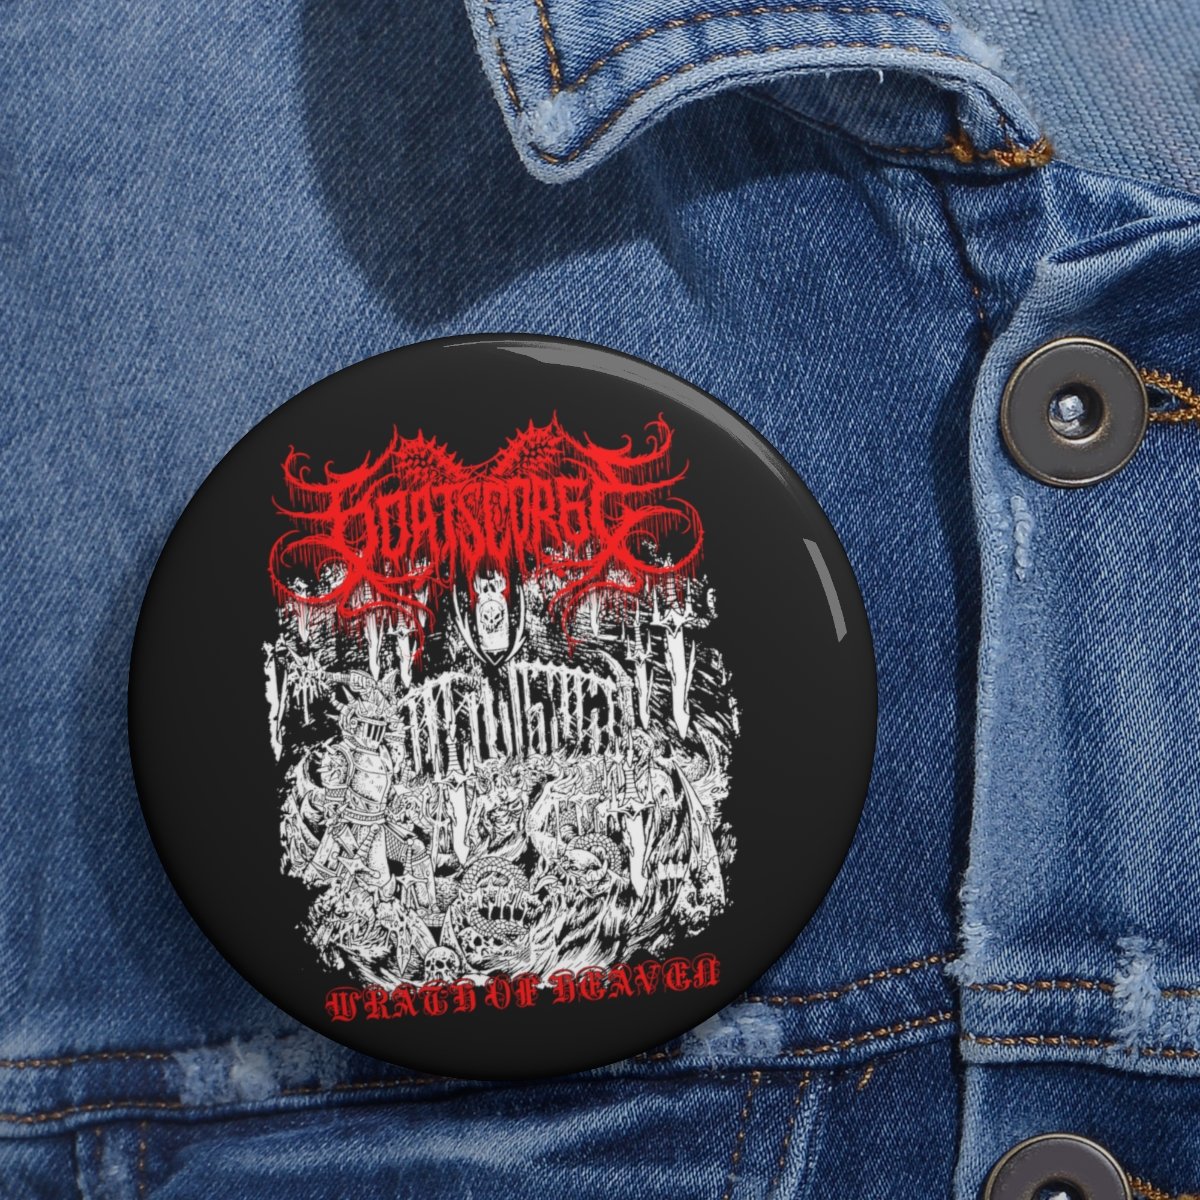 Goatscorge – Wrath of Heaven Pin Buttons